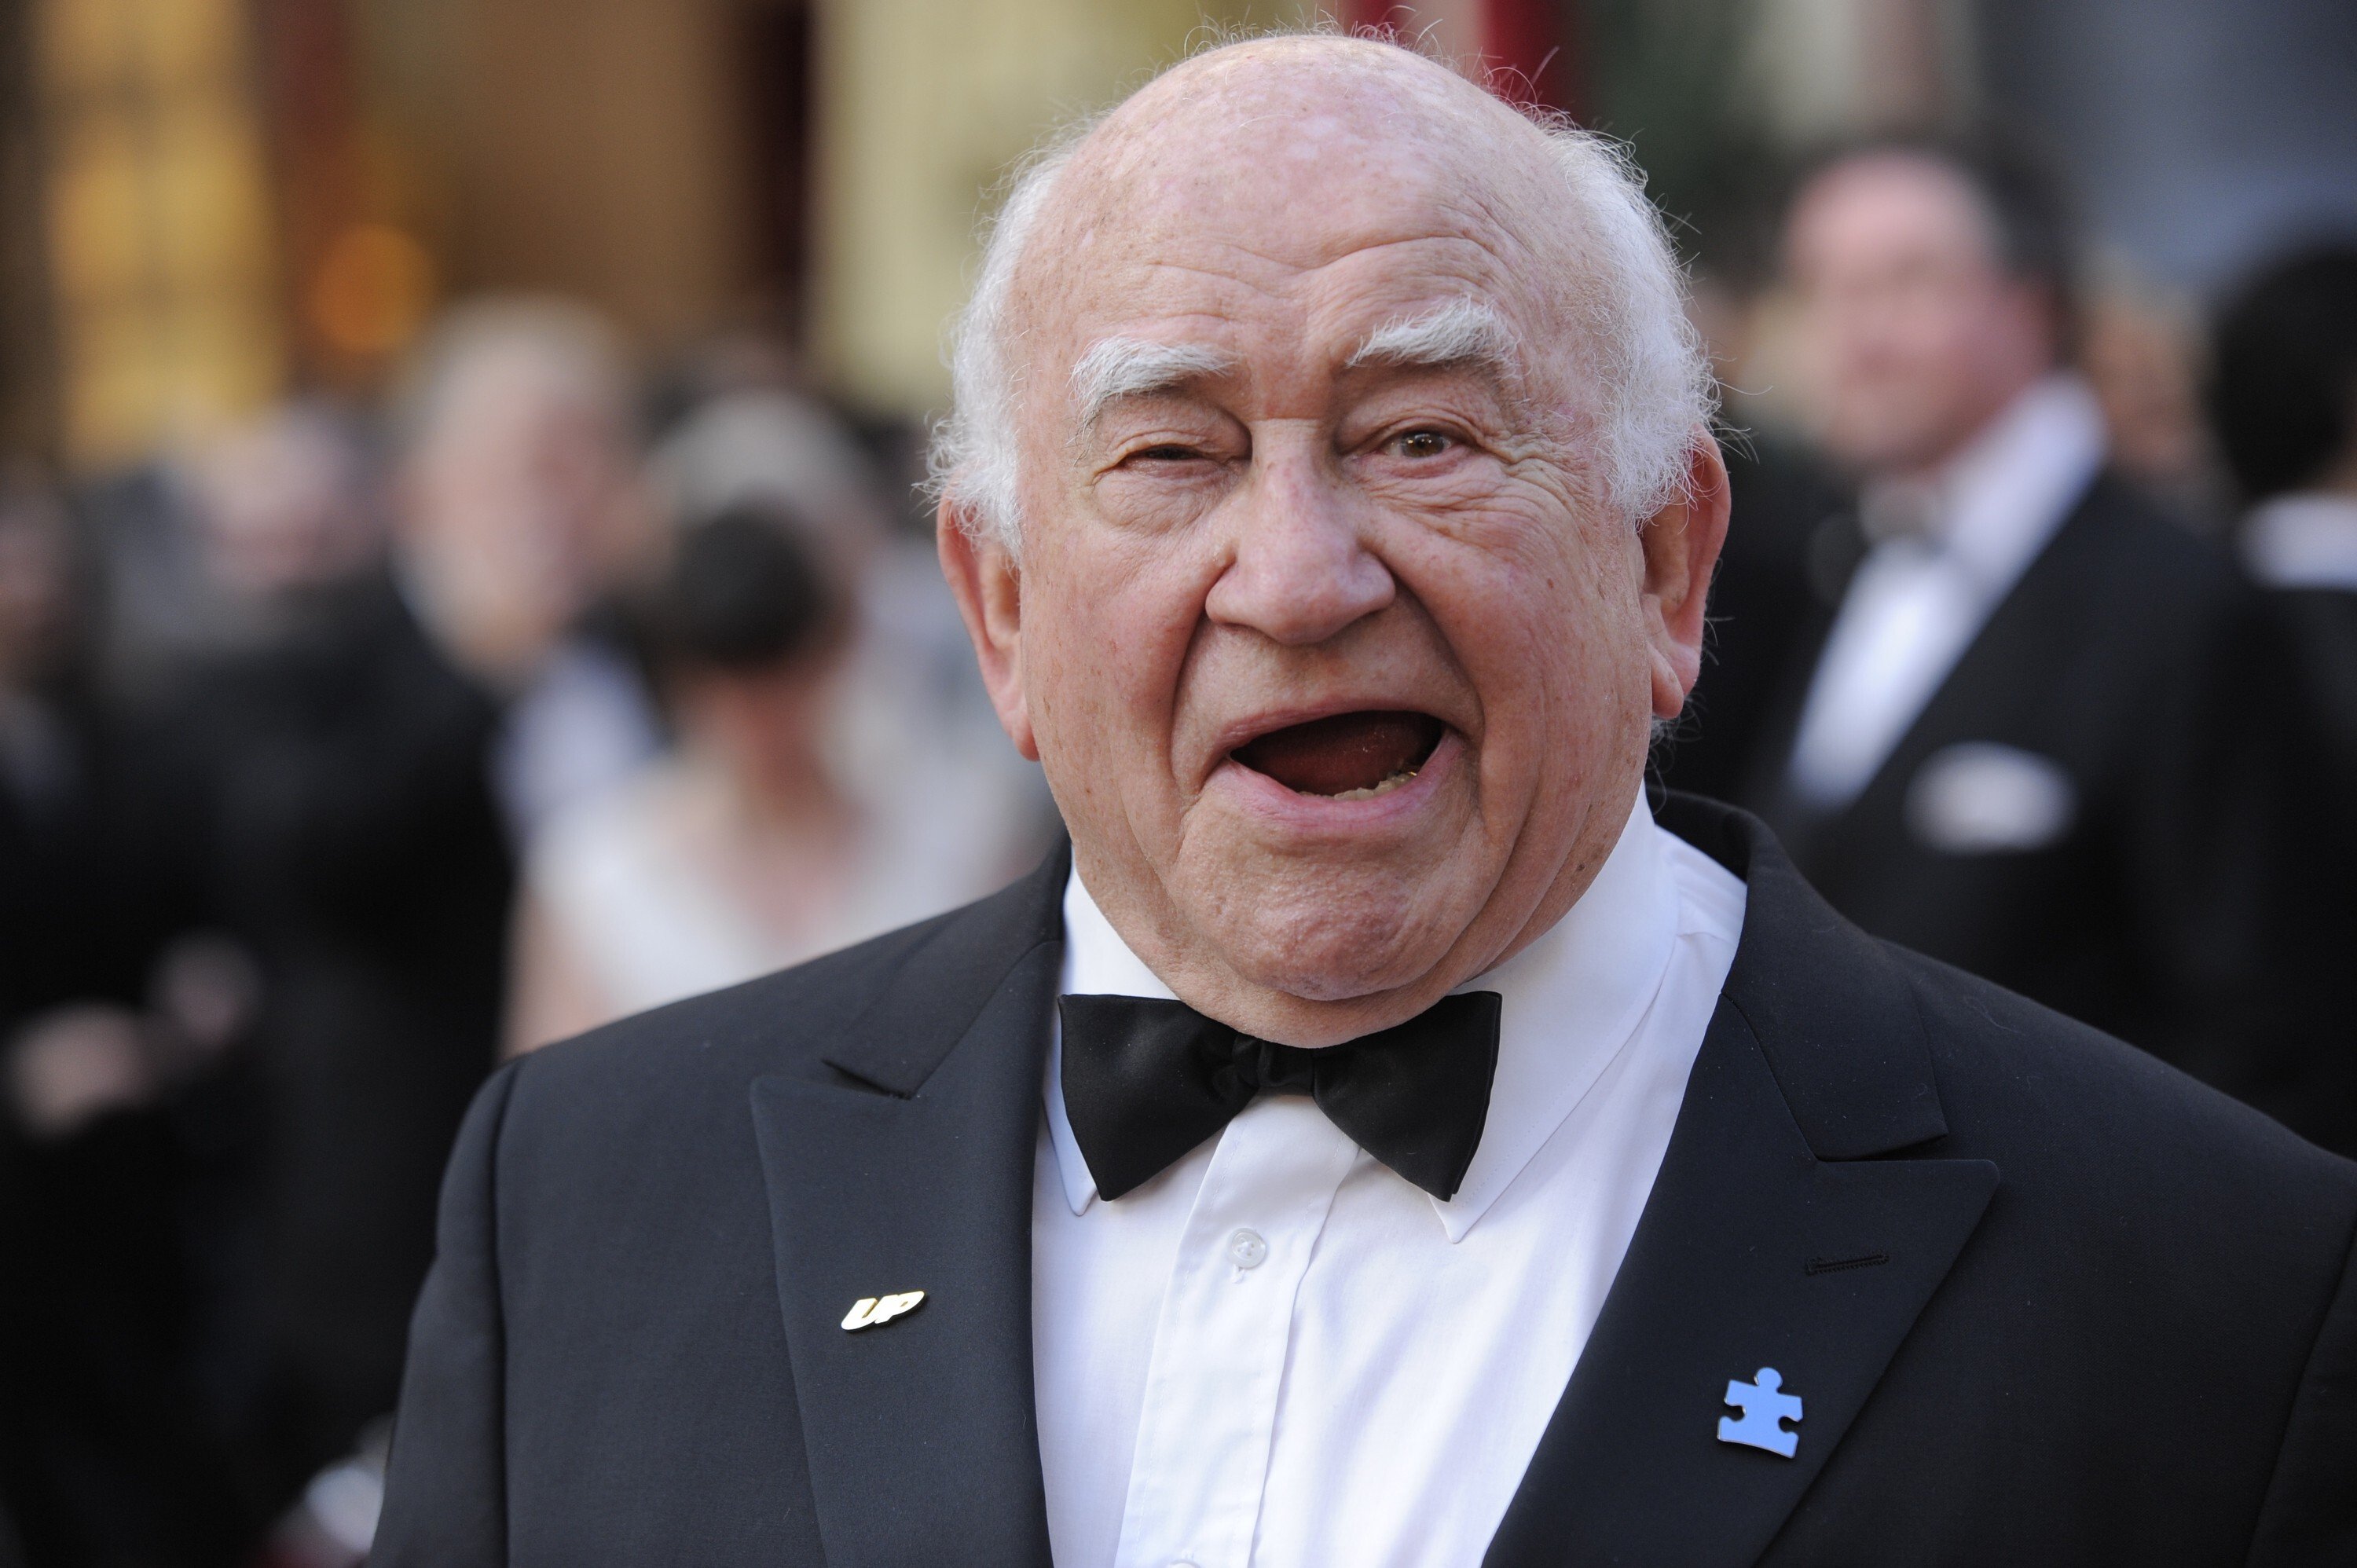 Actor Ed Asner at the 82nd Academy Awards in Hollywood, Los Angeles in 2010. Photo: AP